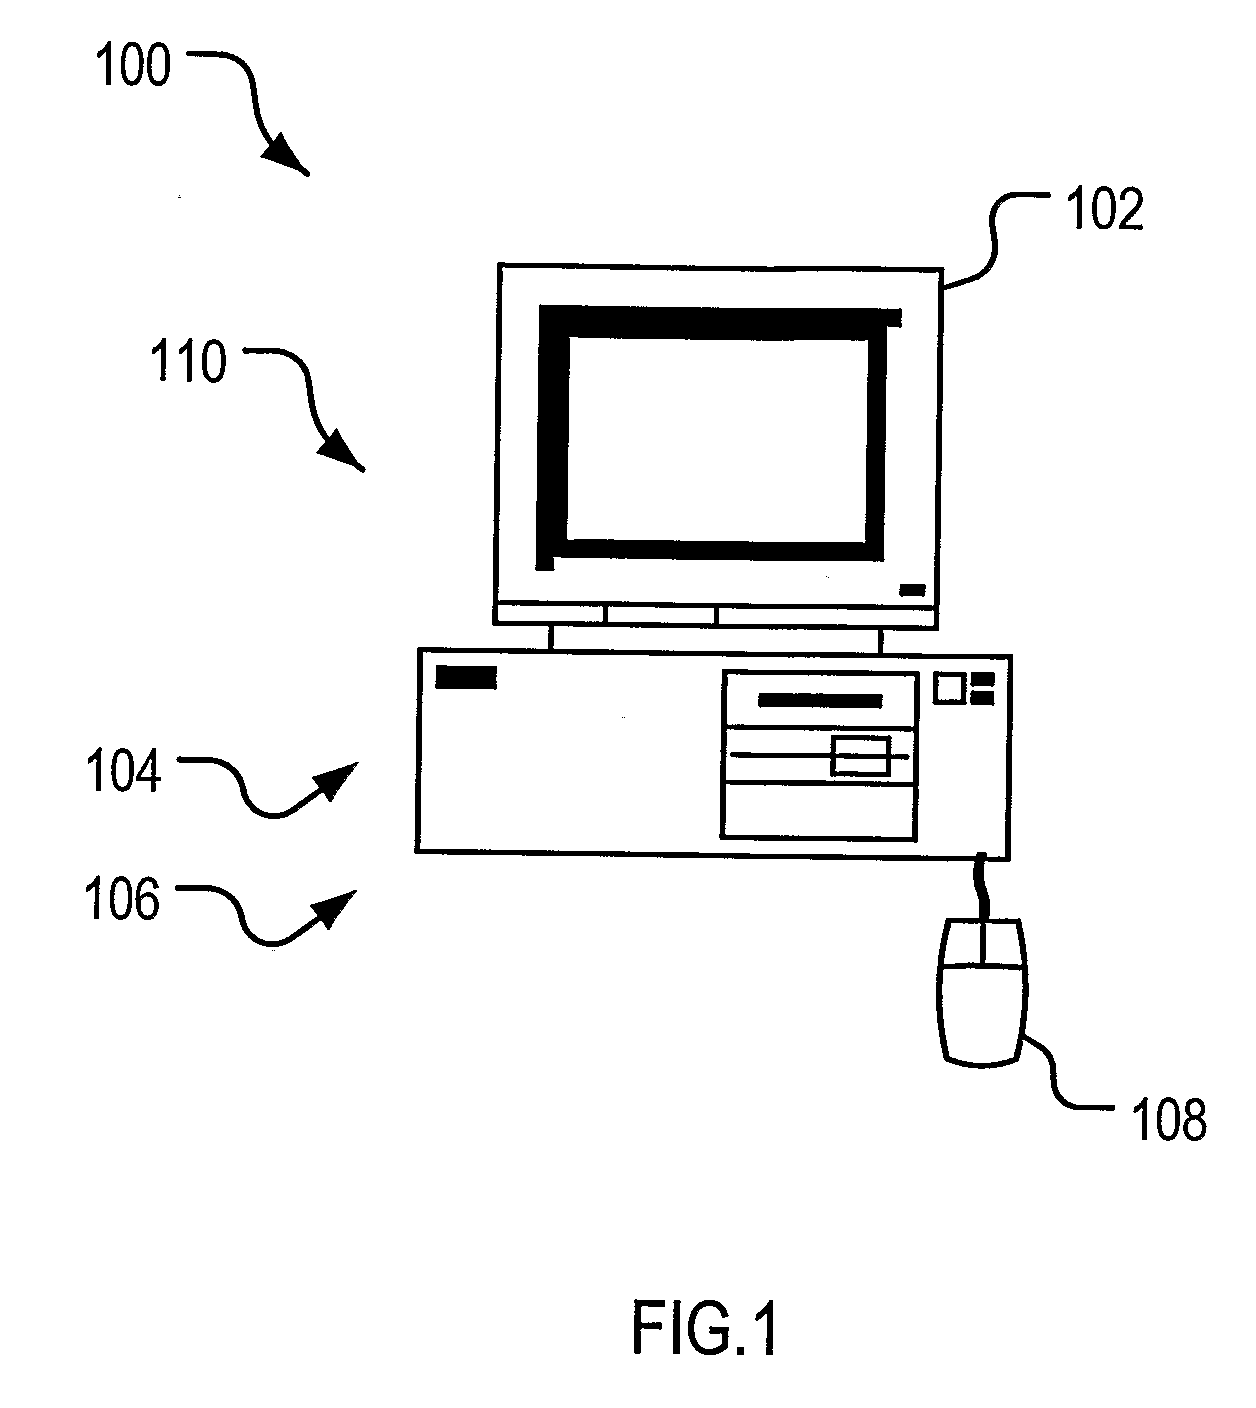 Vision Testing System and Method